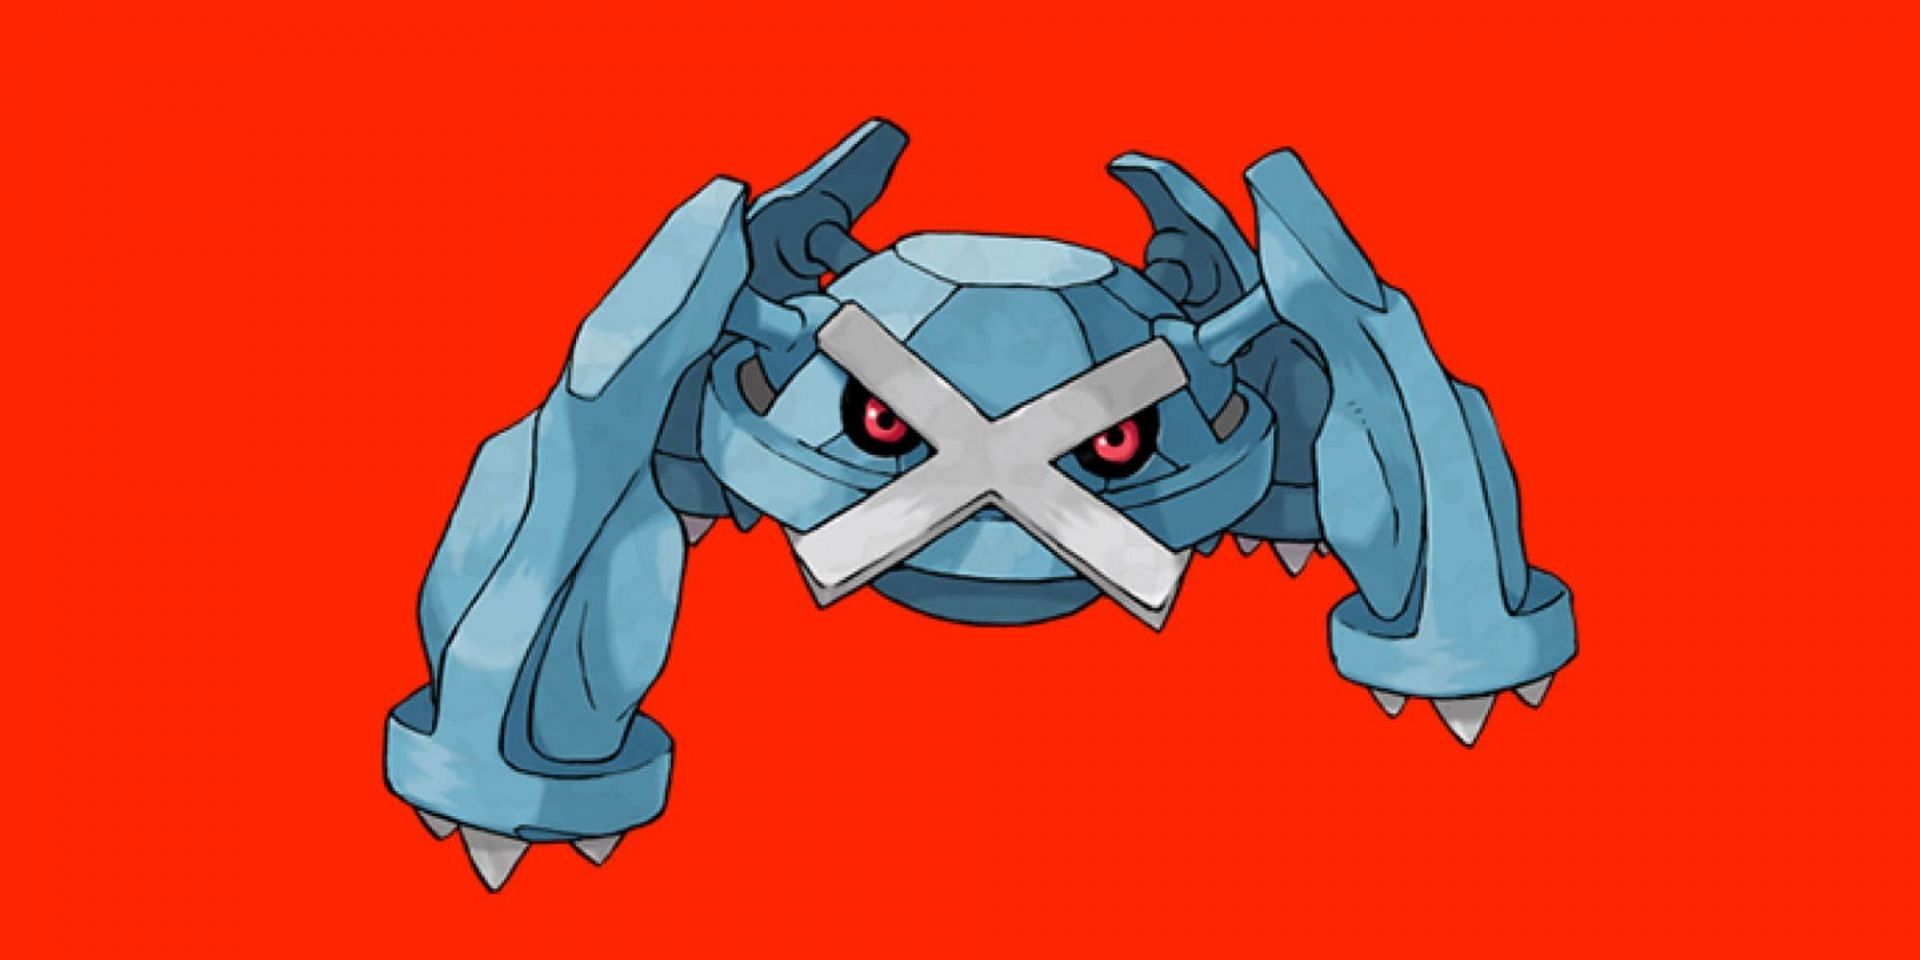 Metagross has remained a top Steel-type Pokemon since its inclusion (Image via The Pokemon Company)